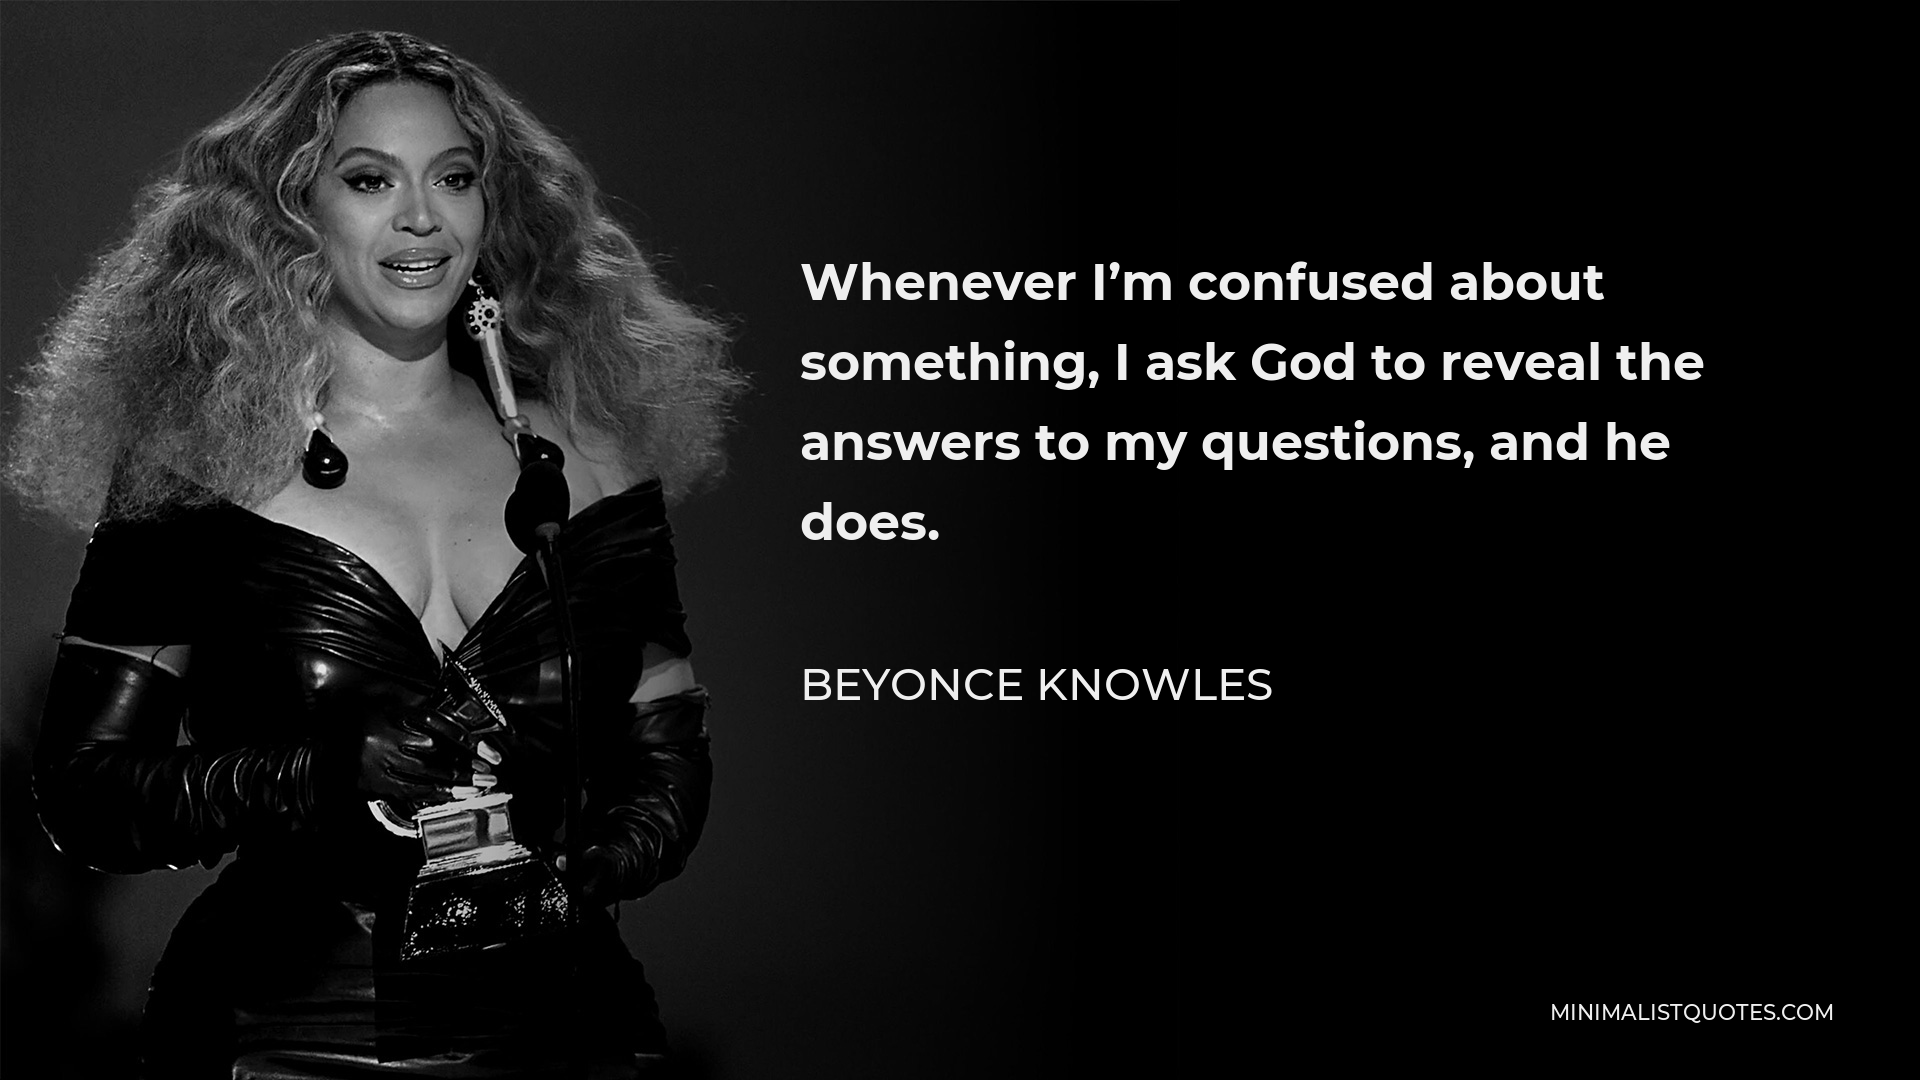 Beyonce Knowles Quote - Whenever I’m confused about something, I ask God to reveal the answers to my questions, and he does.